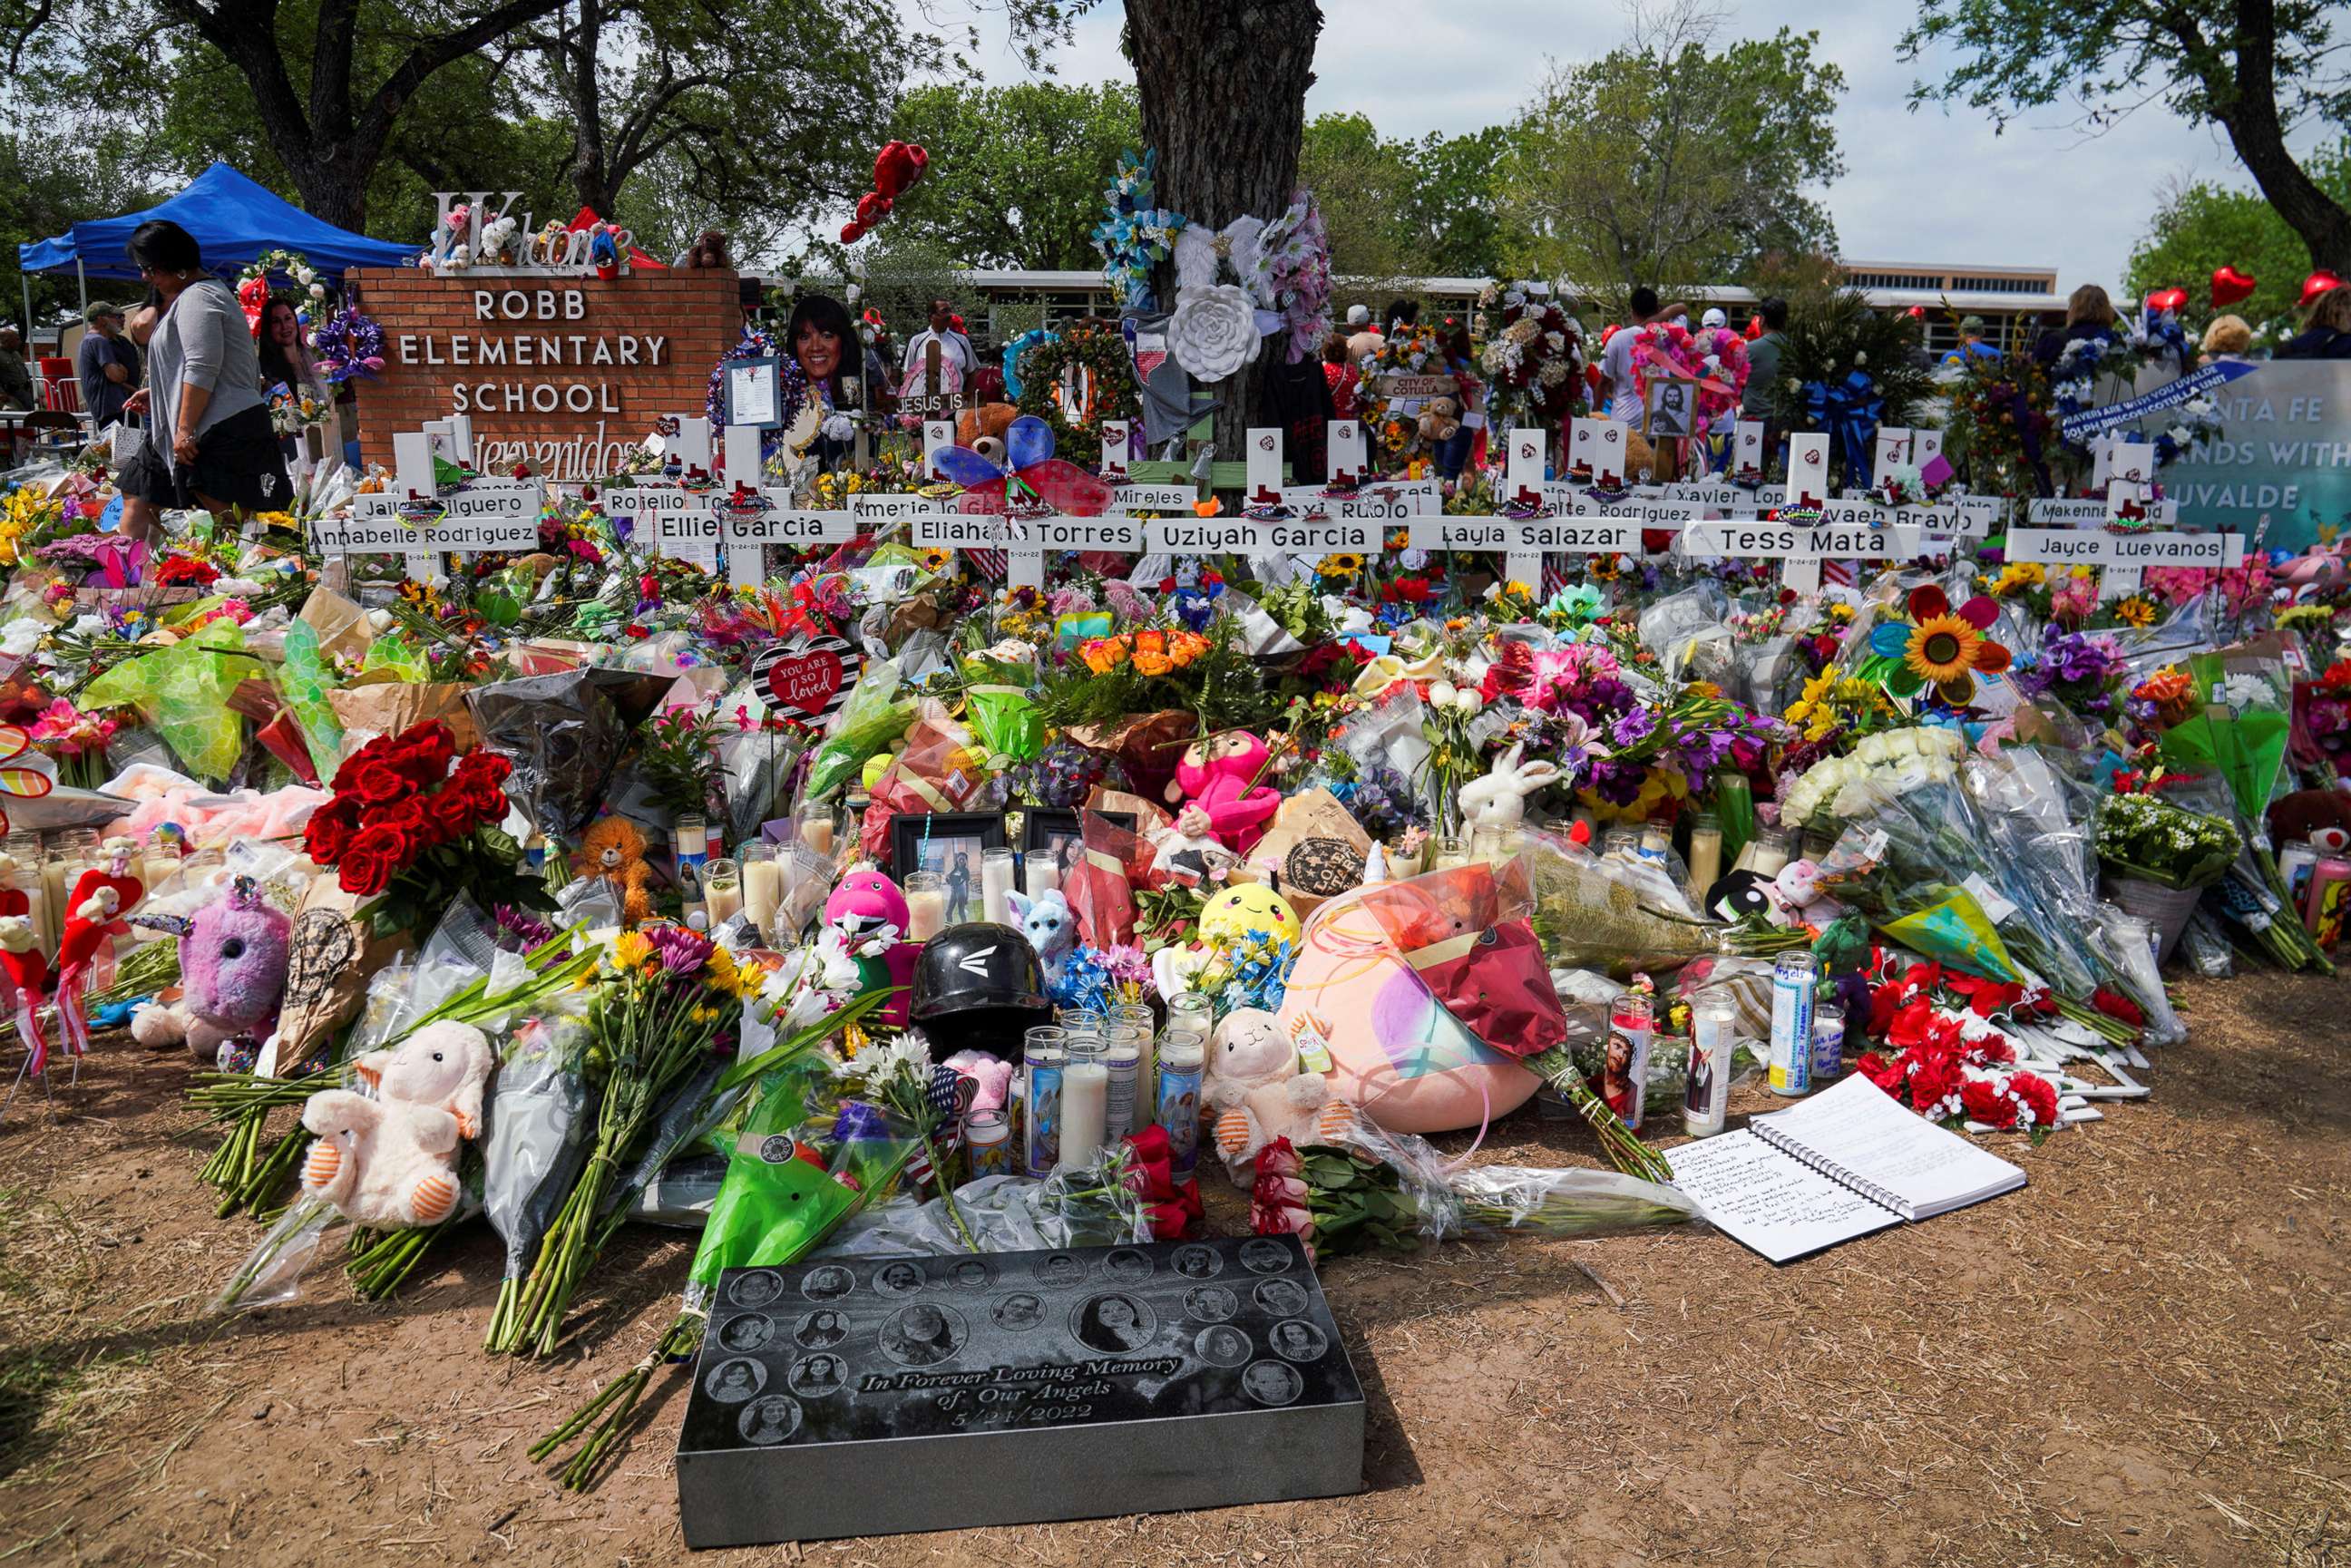 PHOTO: Flowers, toys, and other objects to remember the victims of the deadliest U.S. school mass shooting in nearly a decade, are pictured at the Robb Elementary School in Uvalde, Texas, on May 30, 2022.